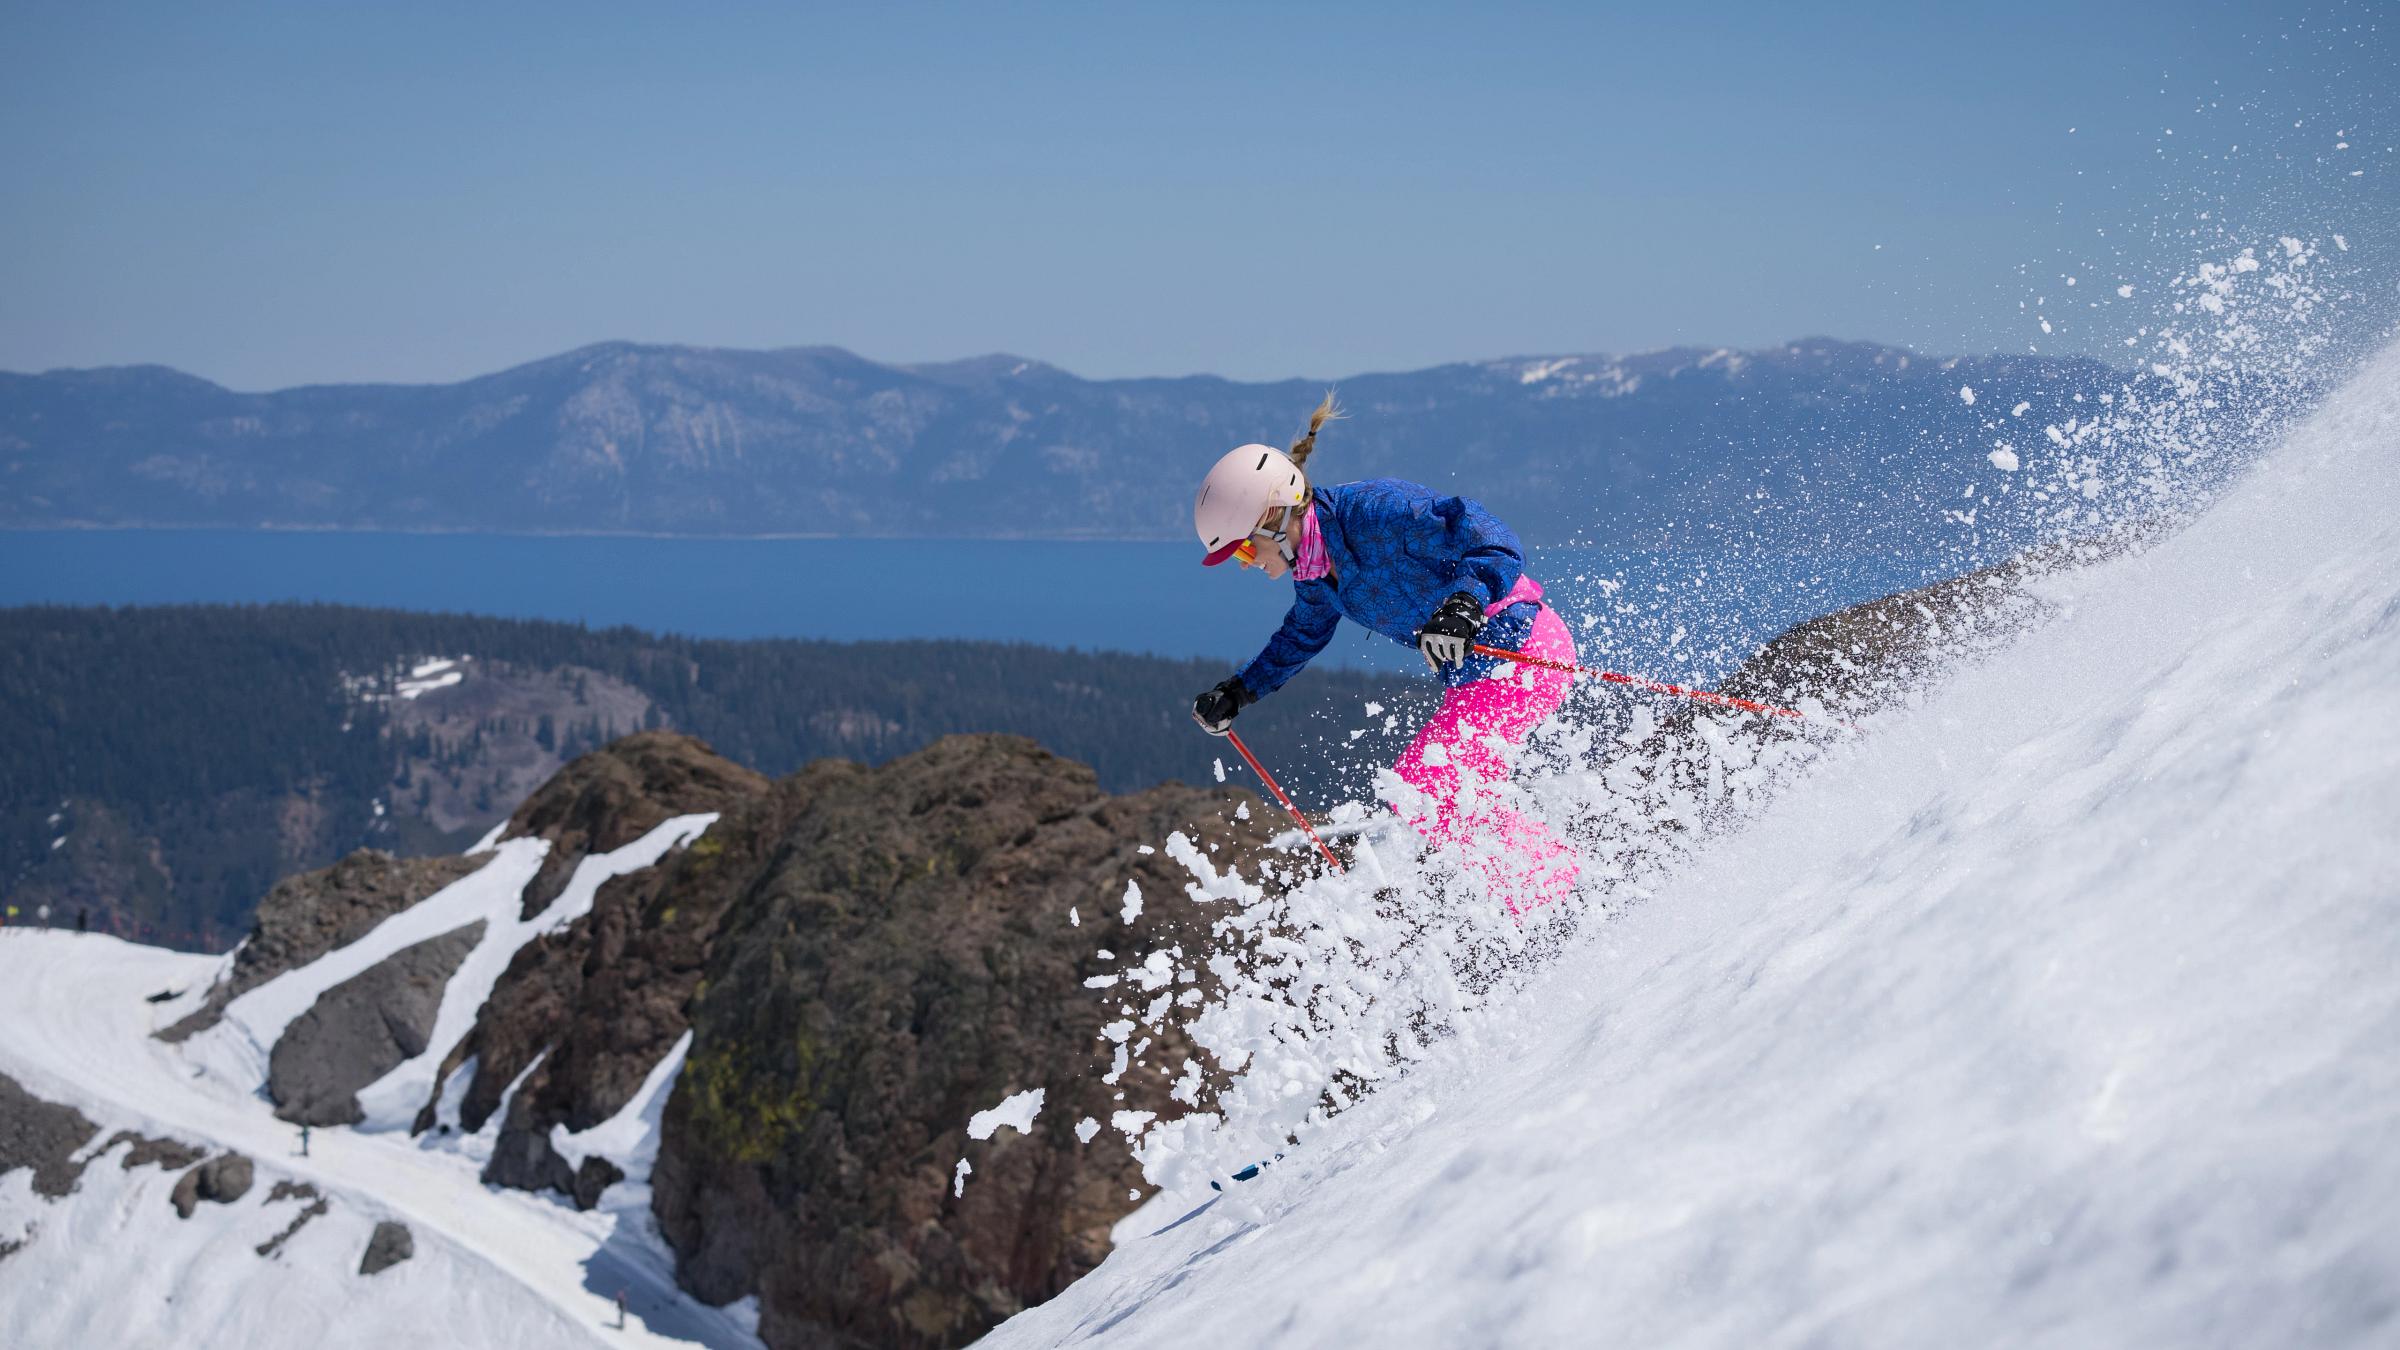 gnarbie spring skiing above lake tahoe at squaw valley